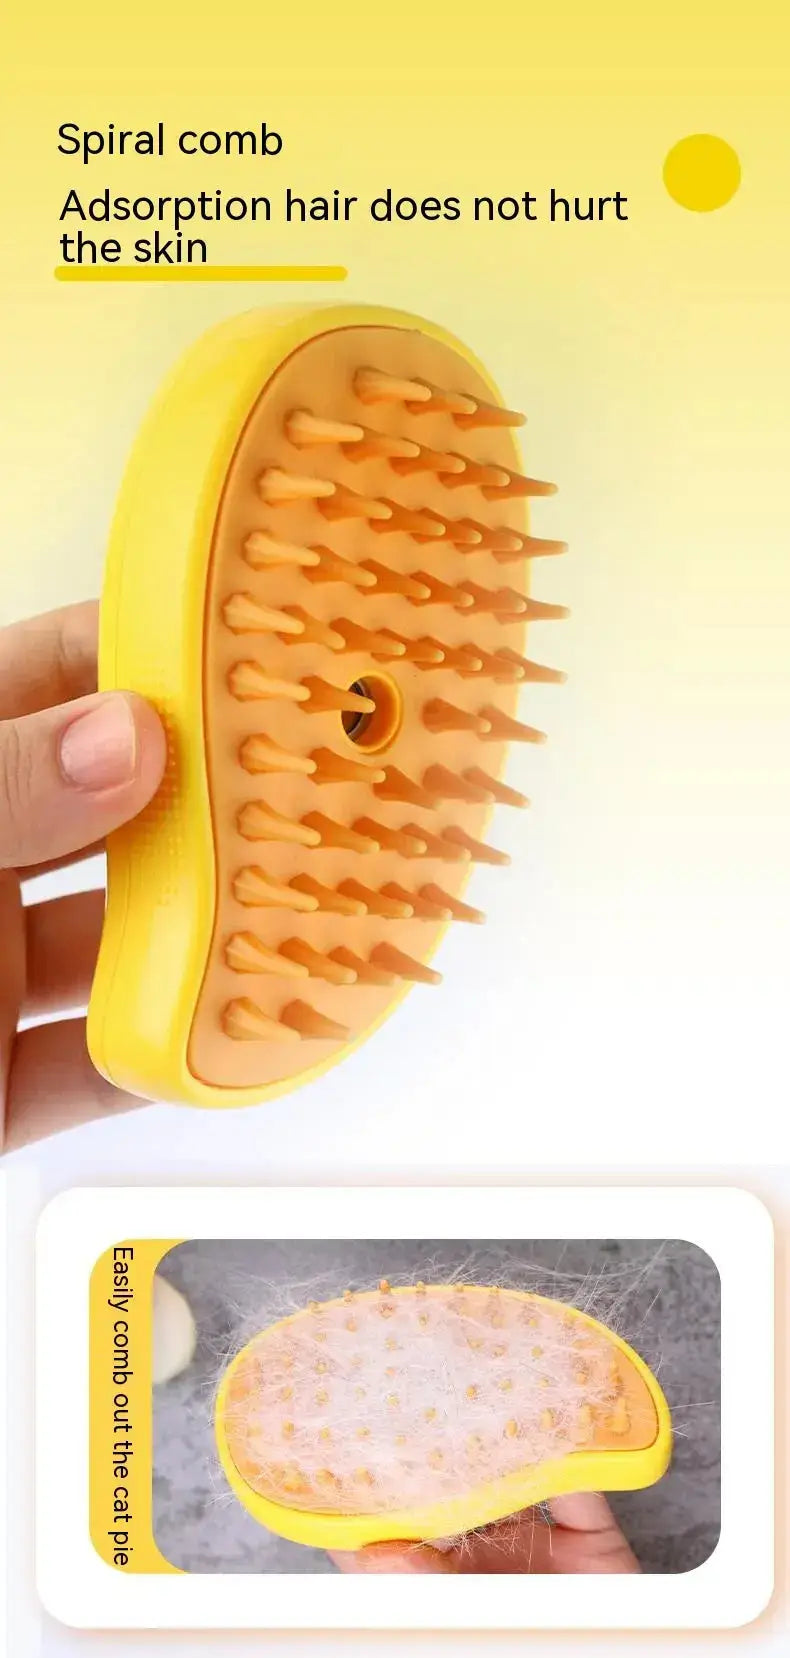 SereneGroom Comb: Ultimate Pet Care & MassageDiscover easy pet grooming with SereneGroom's Electric Spray & Massage Comb. Transform pet care with a simple stroke!£8.9